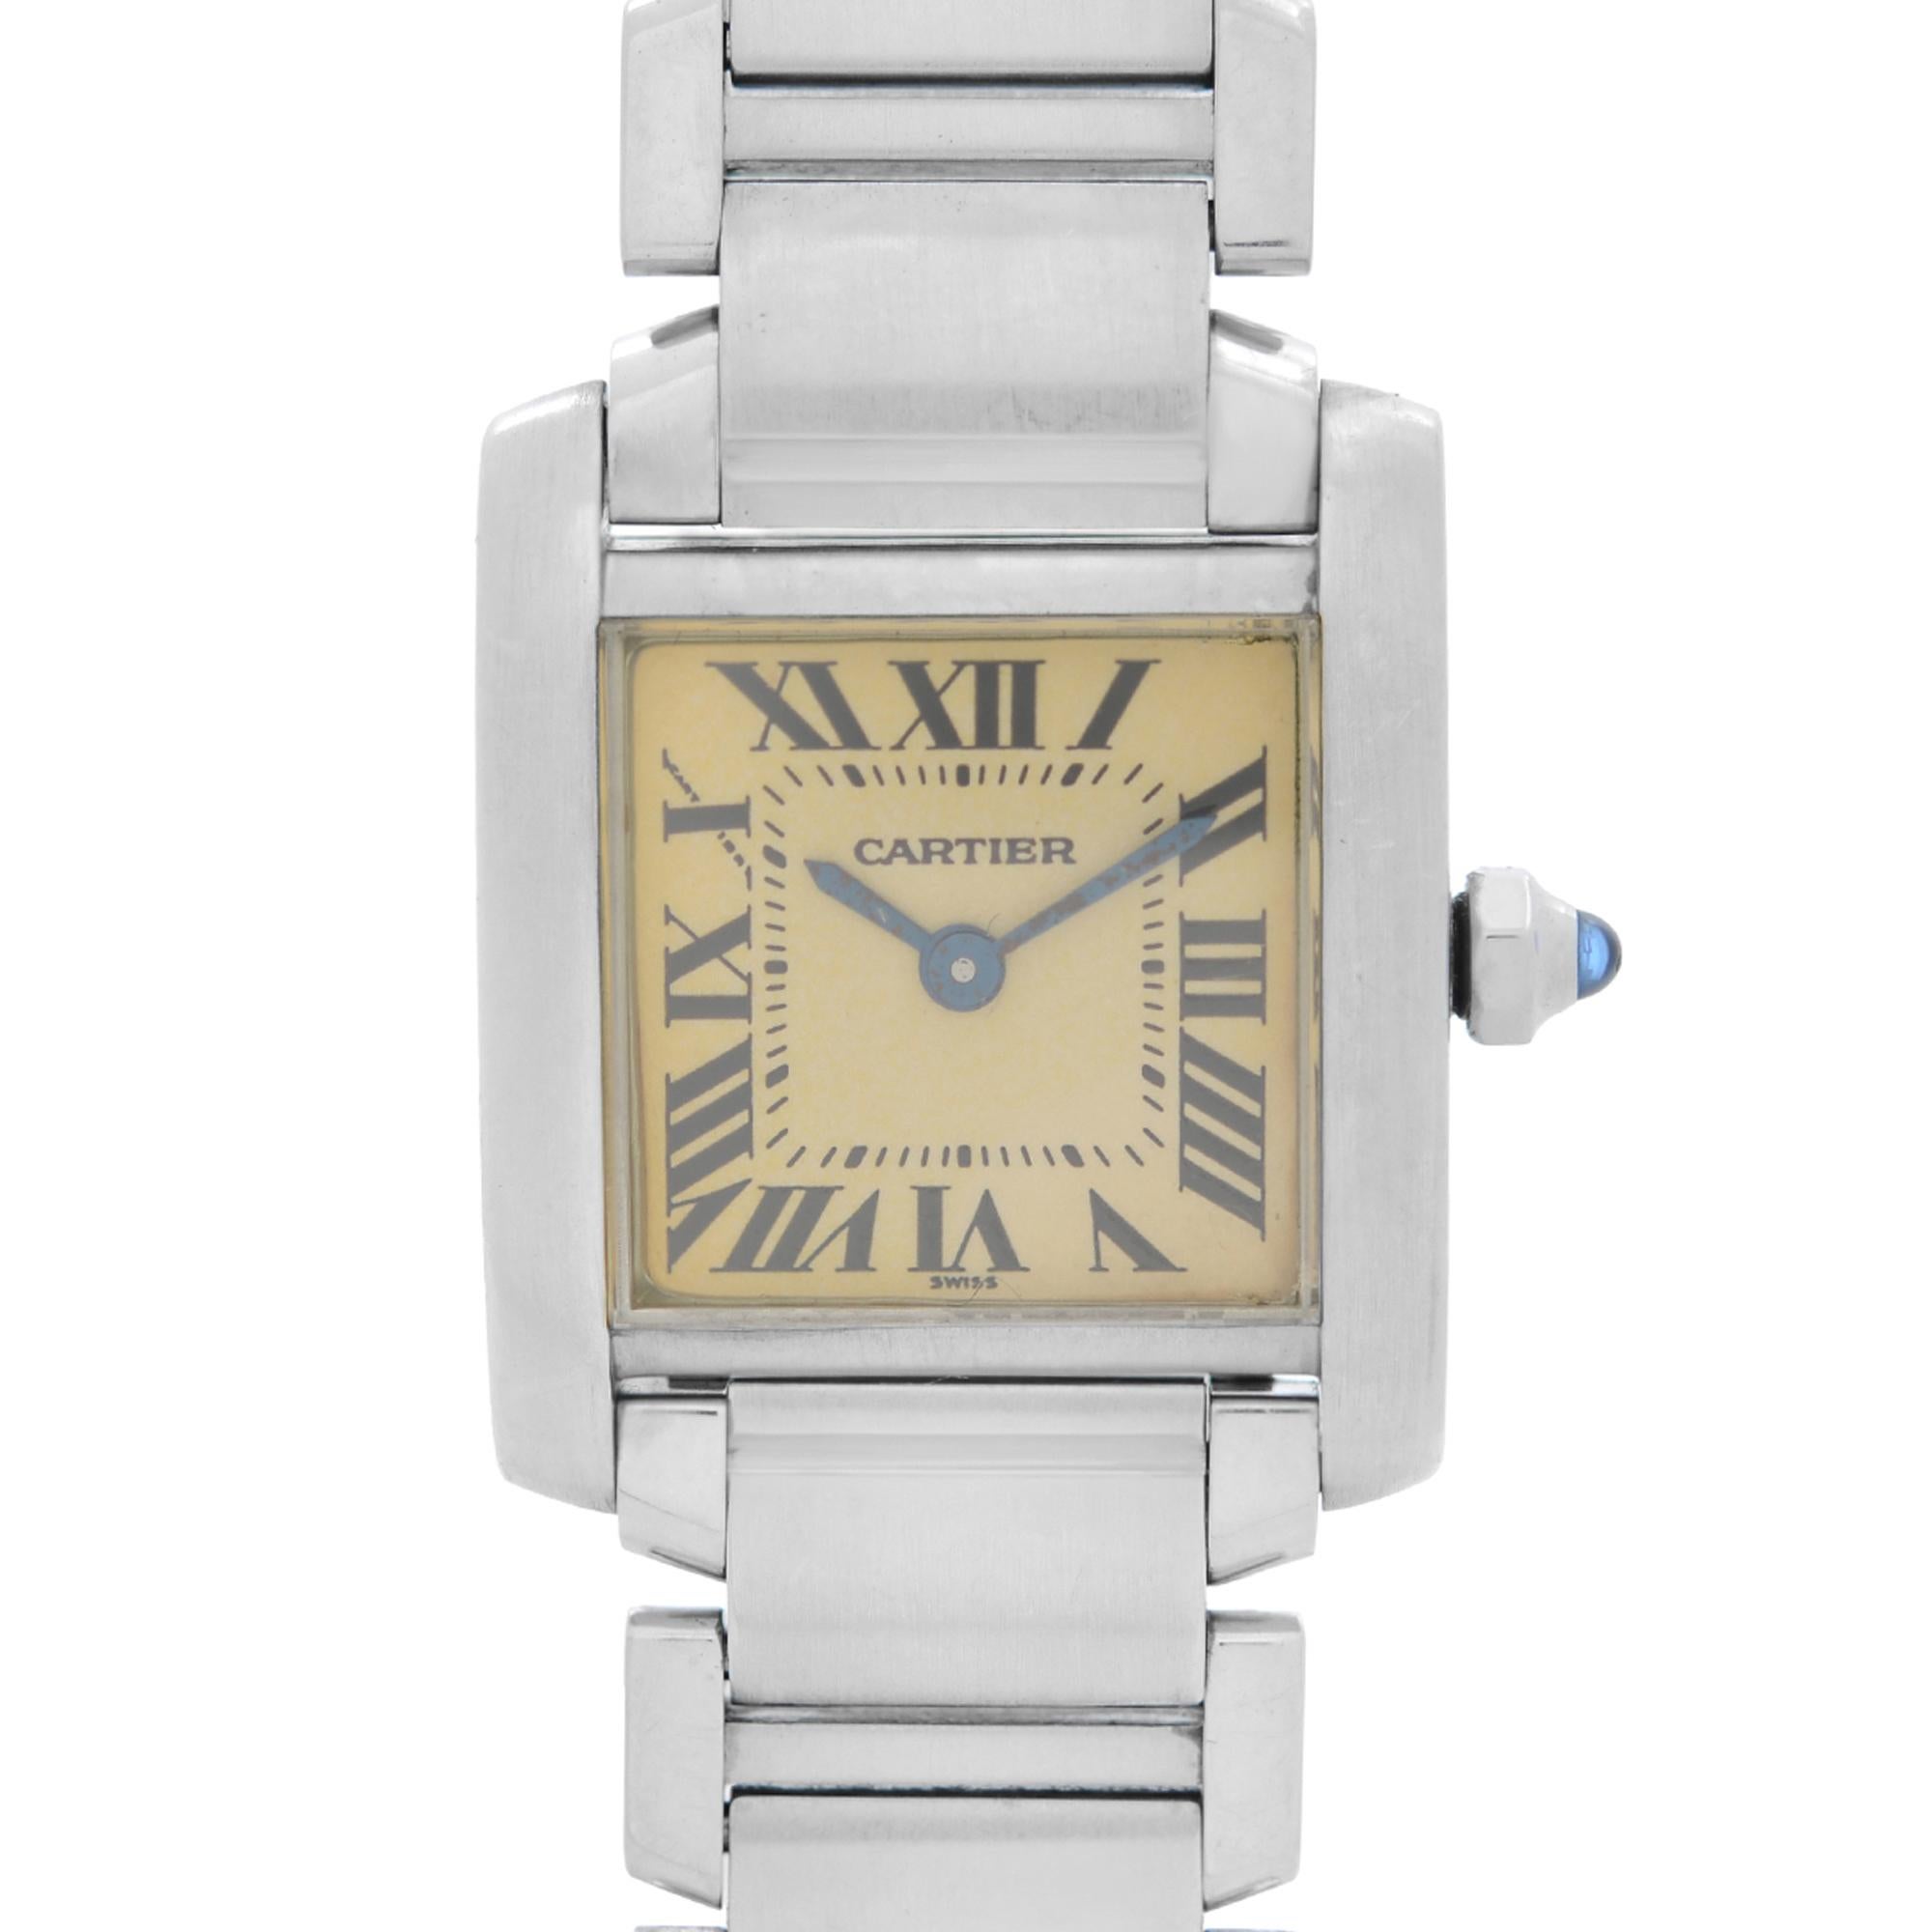 Pre-owned Cartier Tank Francaise Stainless Steel Cream Roman Dial Quartz Ladies Watch 2300. dial becomes due to age and moisture. blue hands have little rust. Scratches on the crystal.  No Original Boxes and Papers are Included. Comes with